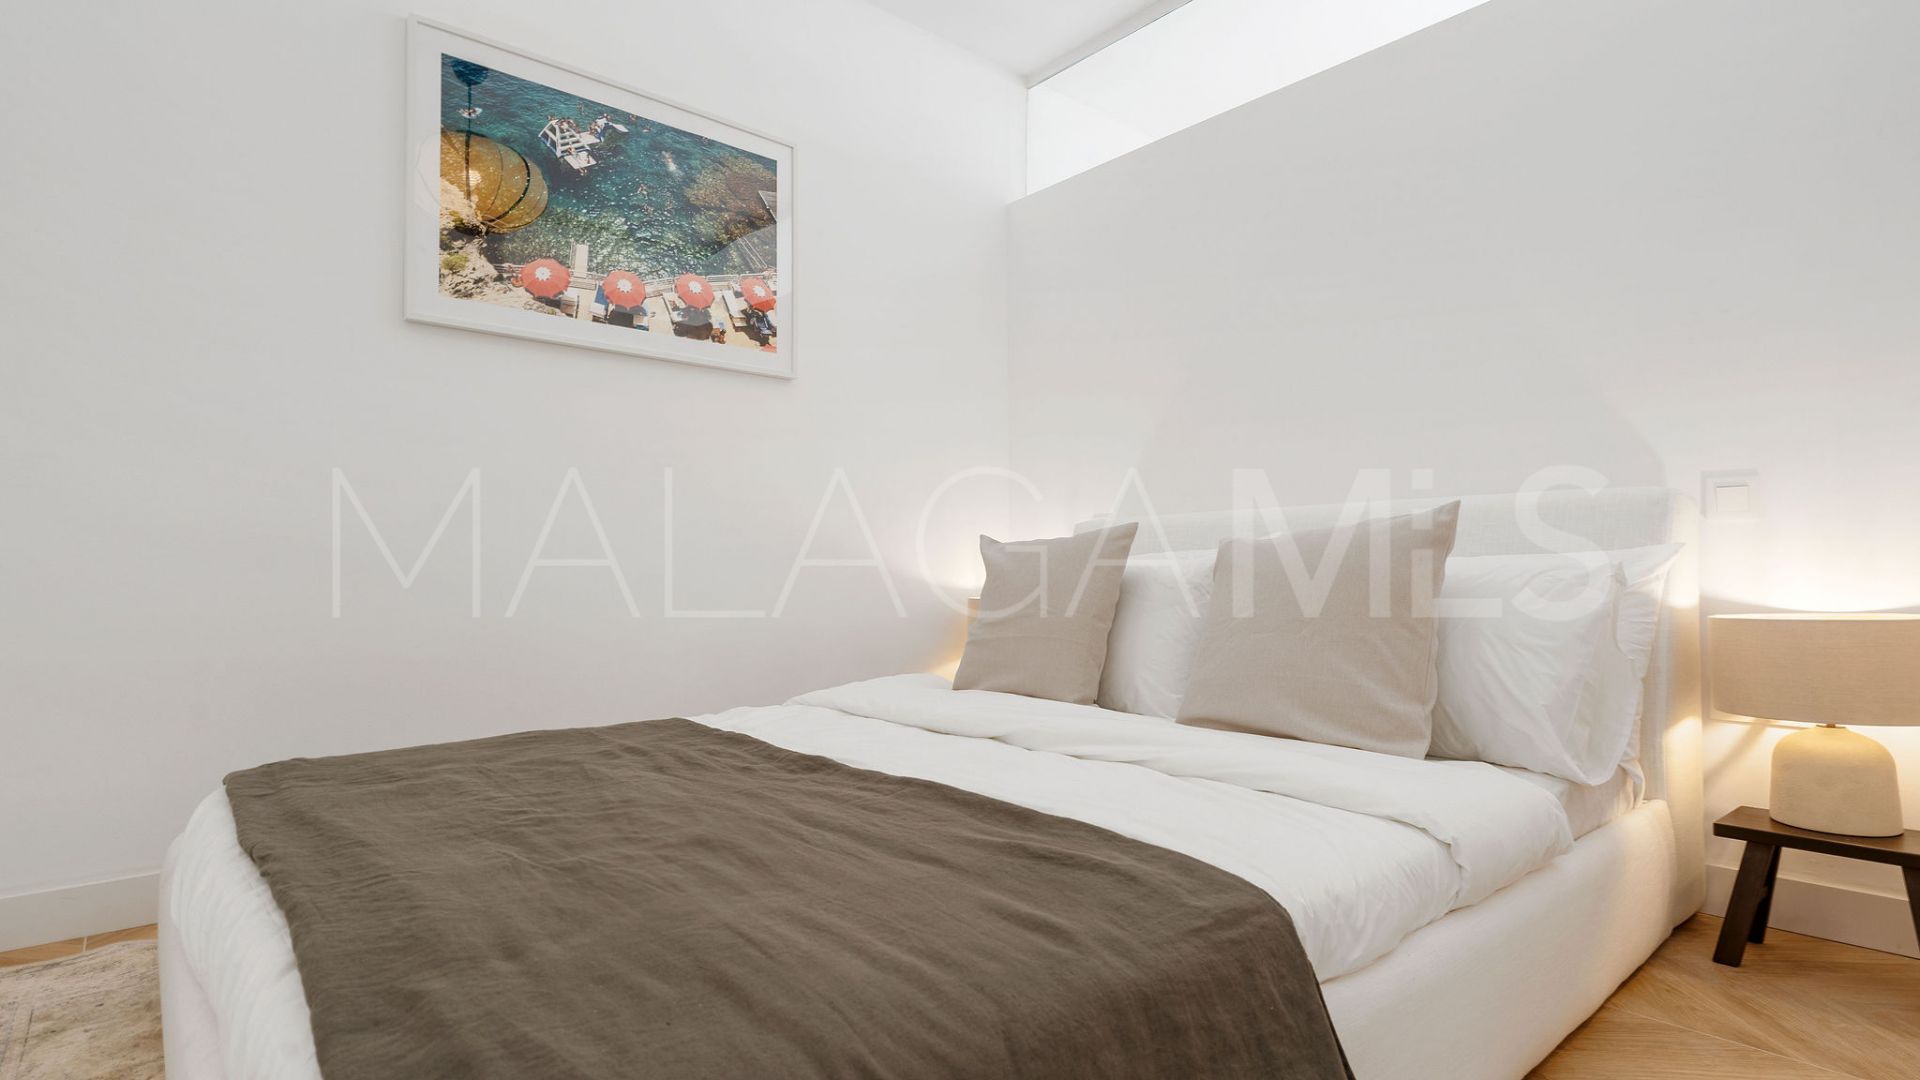 For sale apartment with 4 bedrooms in Palacetes Los Belvederes